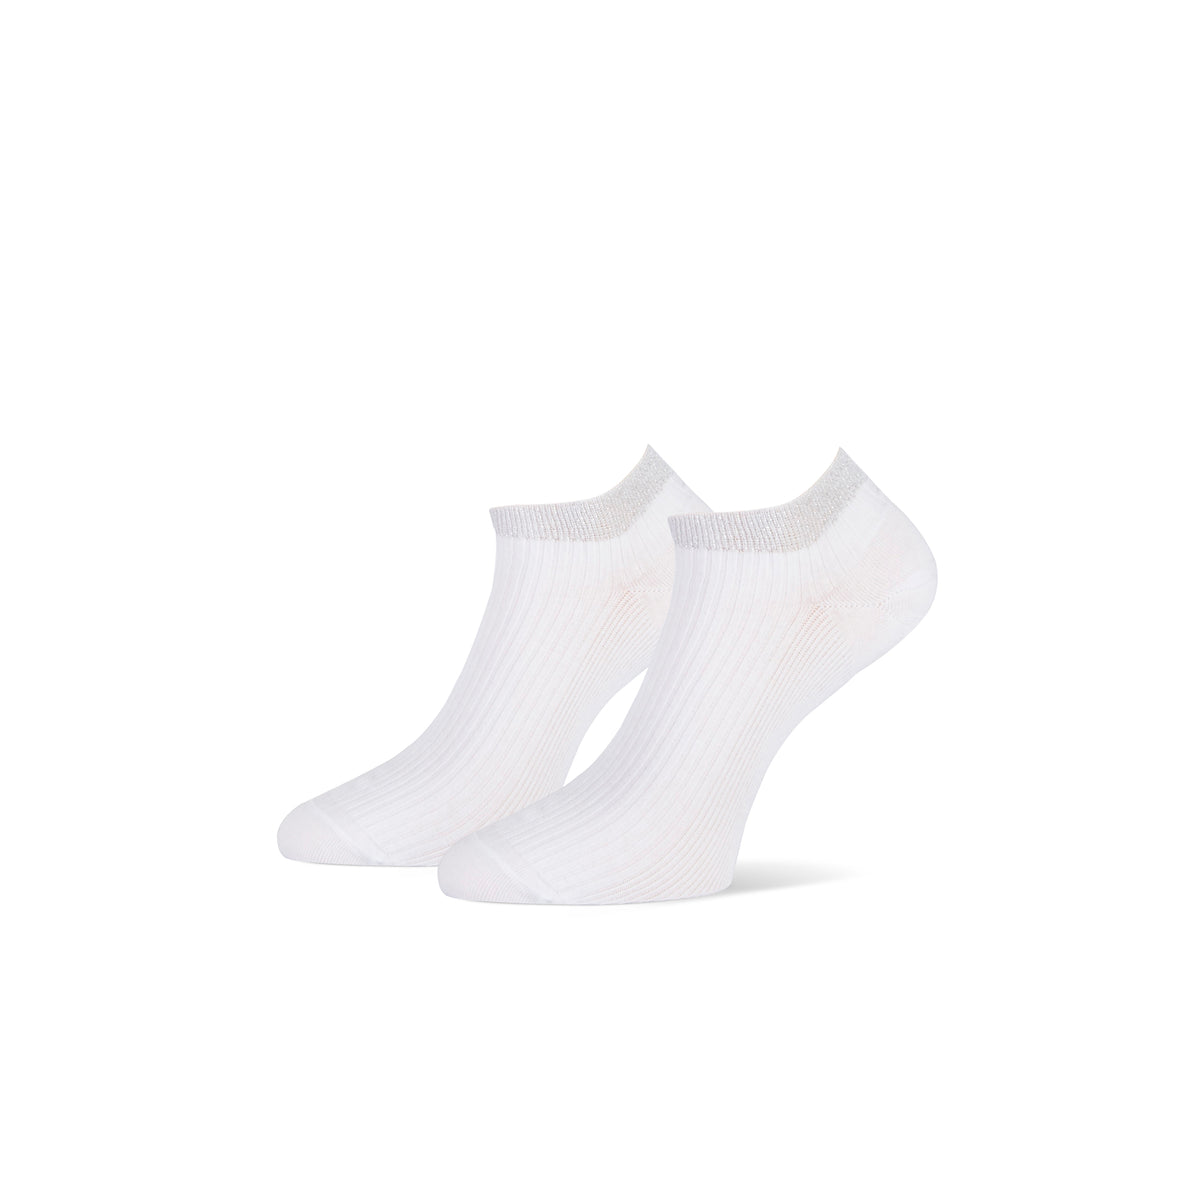 Sneaker MM moscow cotton 2-pack 81936 1000P 2p 2x White